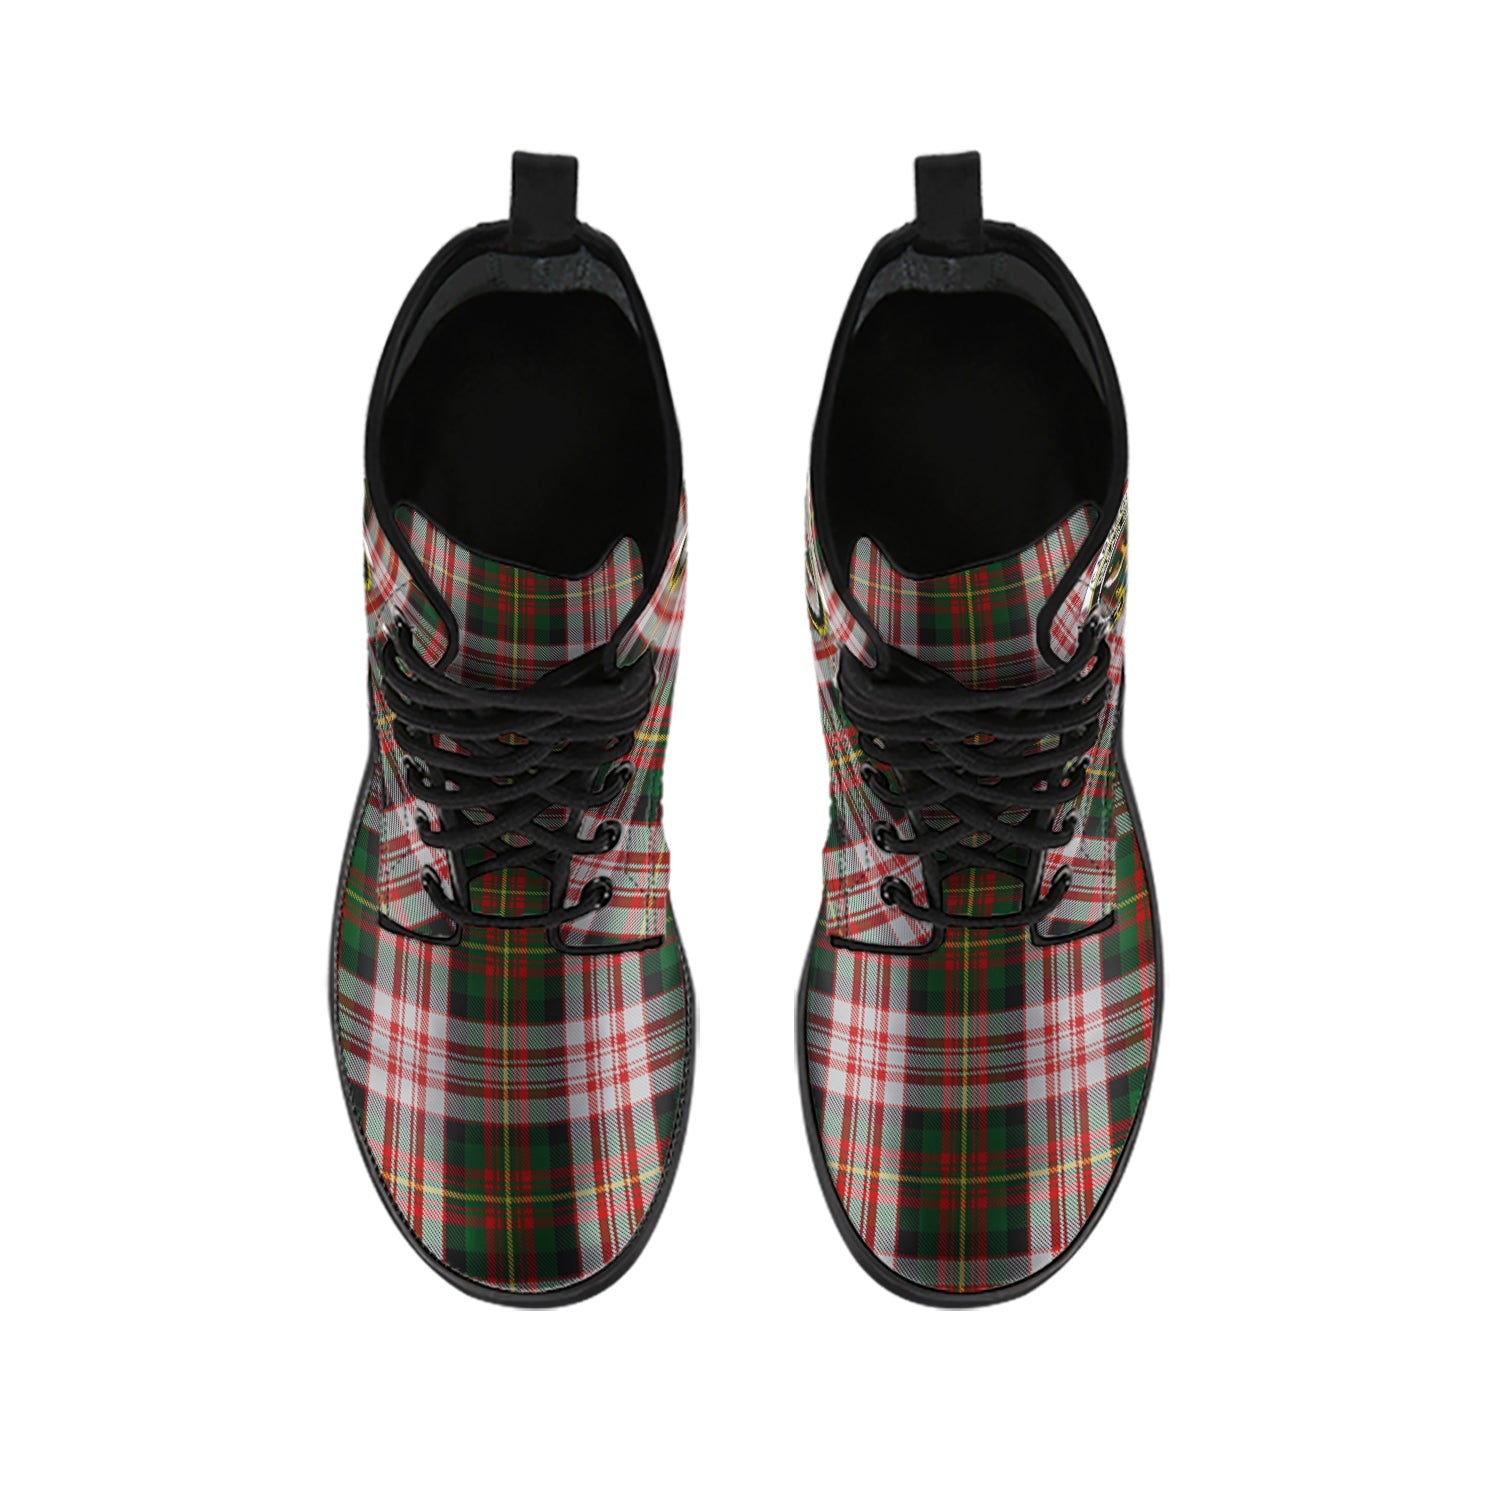 carnegie-dress-tartan-leather-boots-with-family-crest